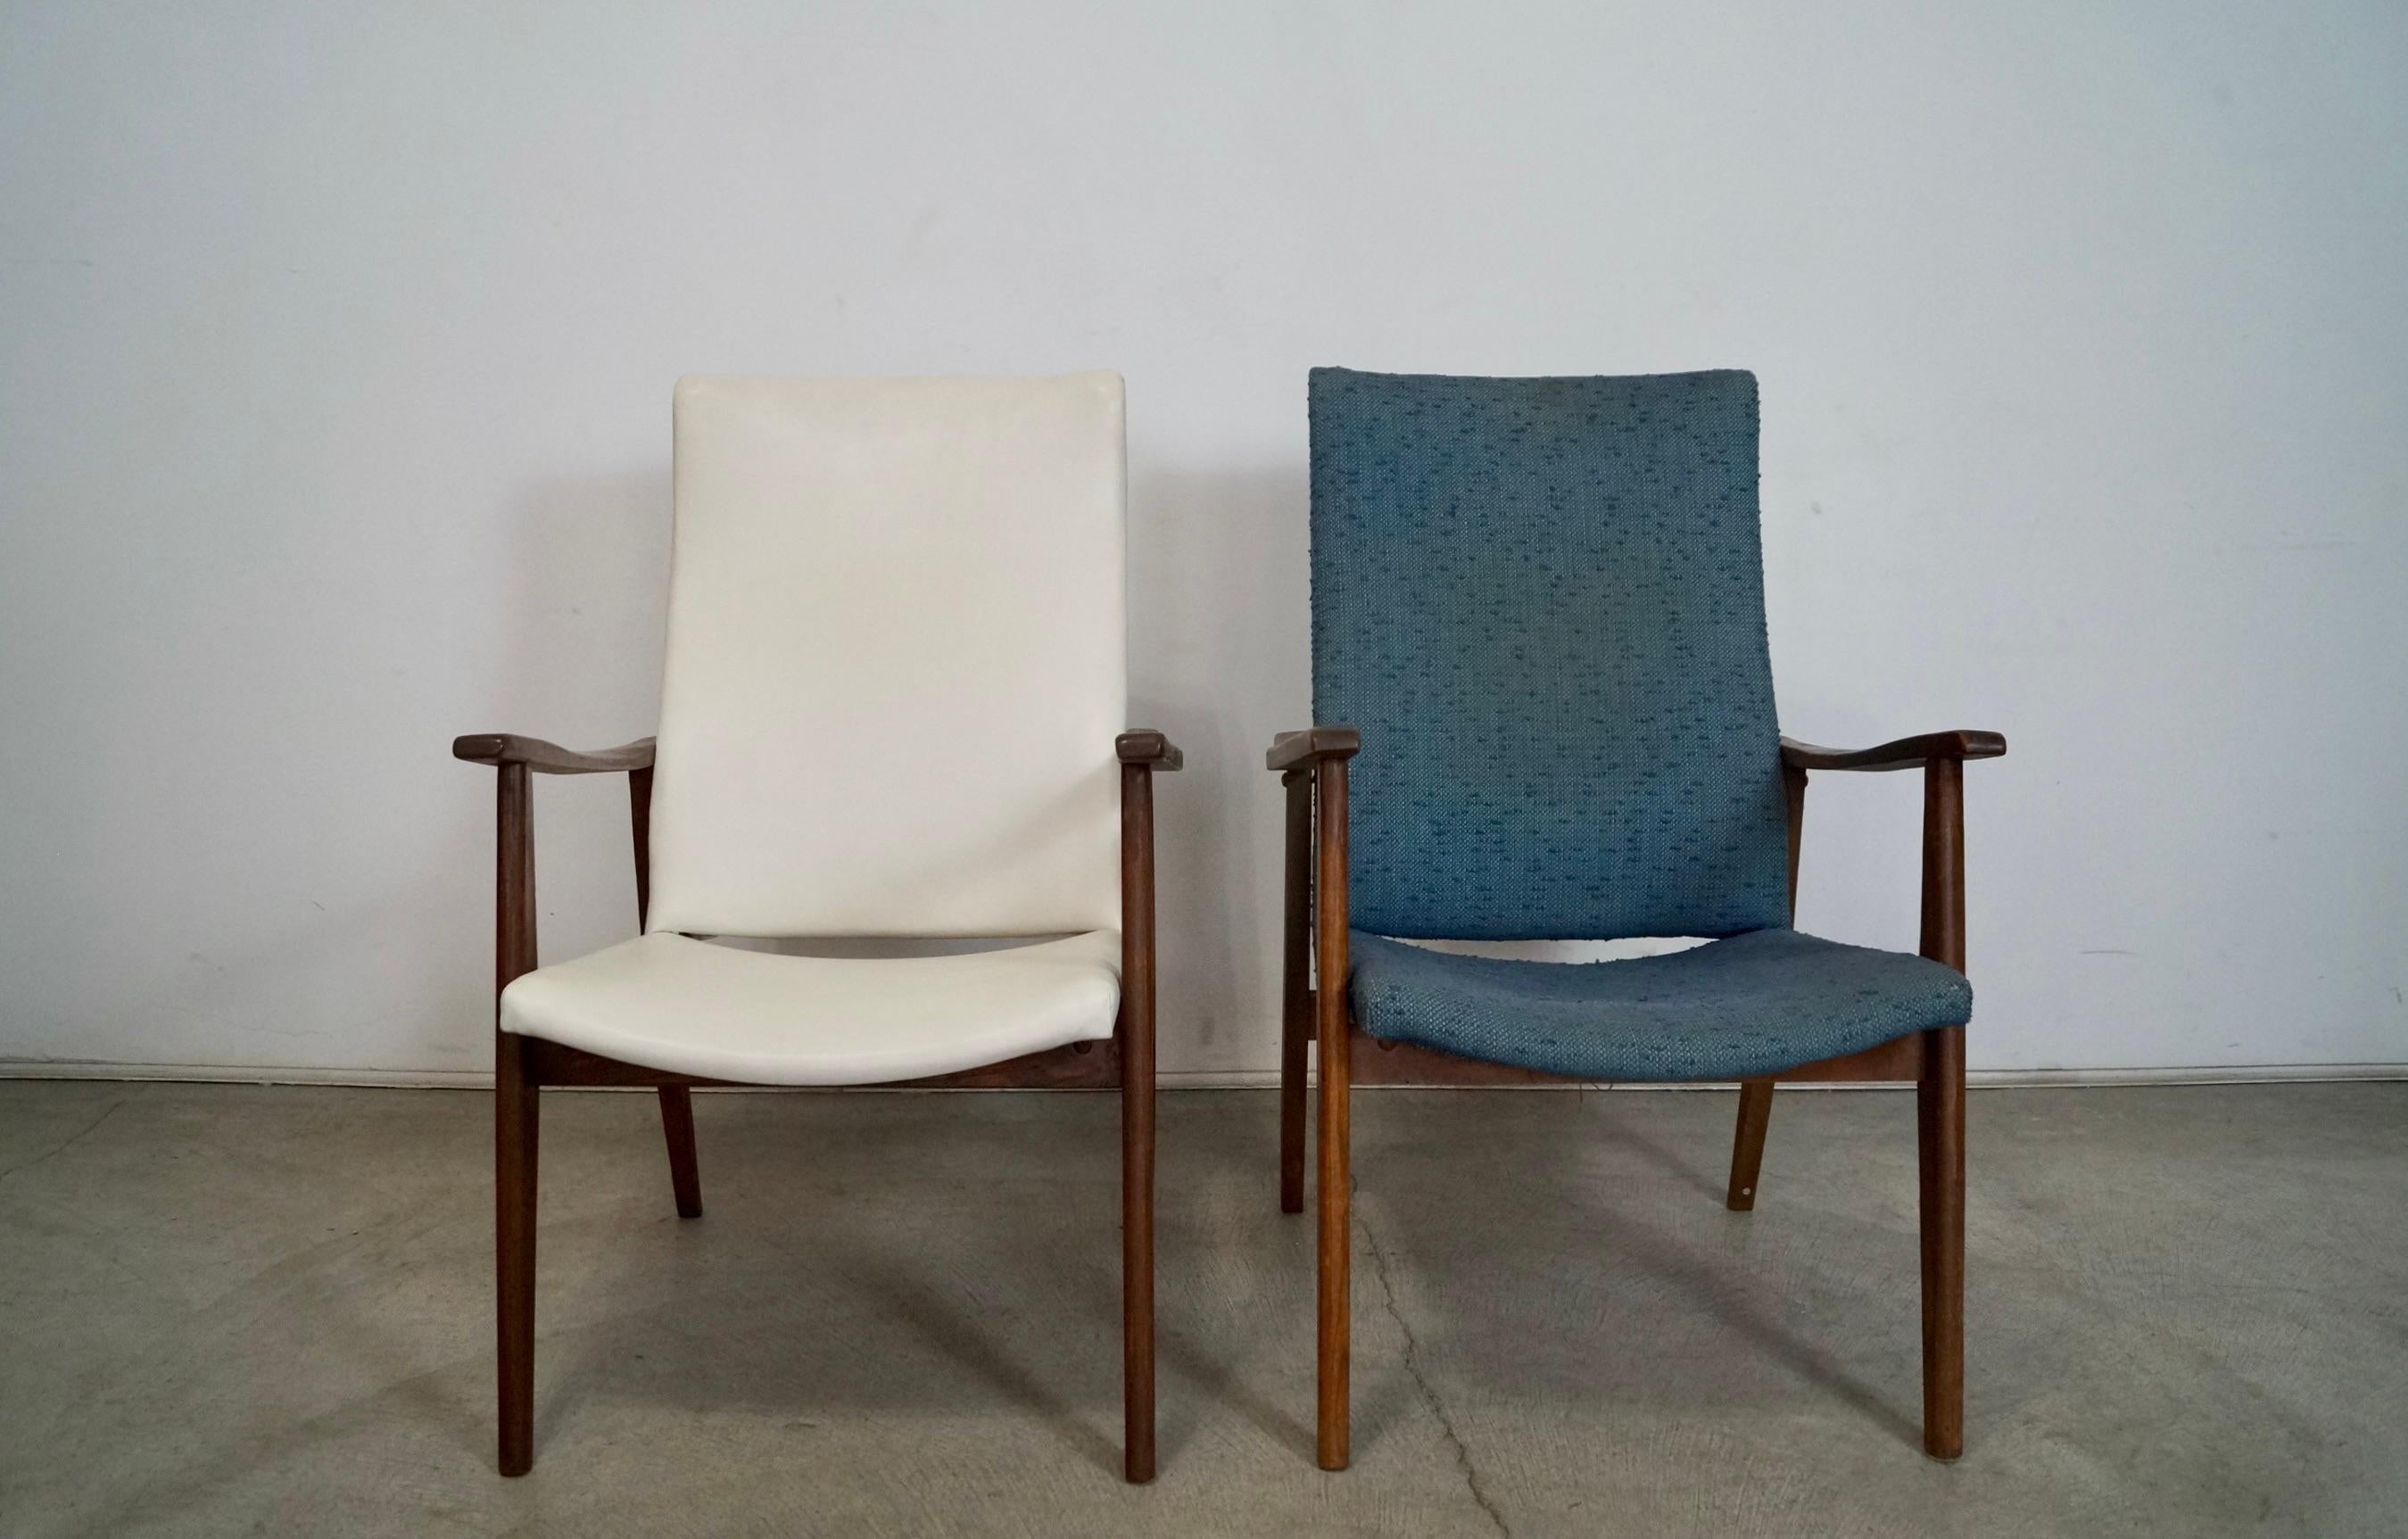 Pair of vintage all original Midcentury Modern lounge armchairs for sale. They have a solid wood frame in a walnut finish. One of them has the original white naugahyde vinyl and the other in a teal nubby fabric. The wood in the white one is in